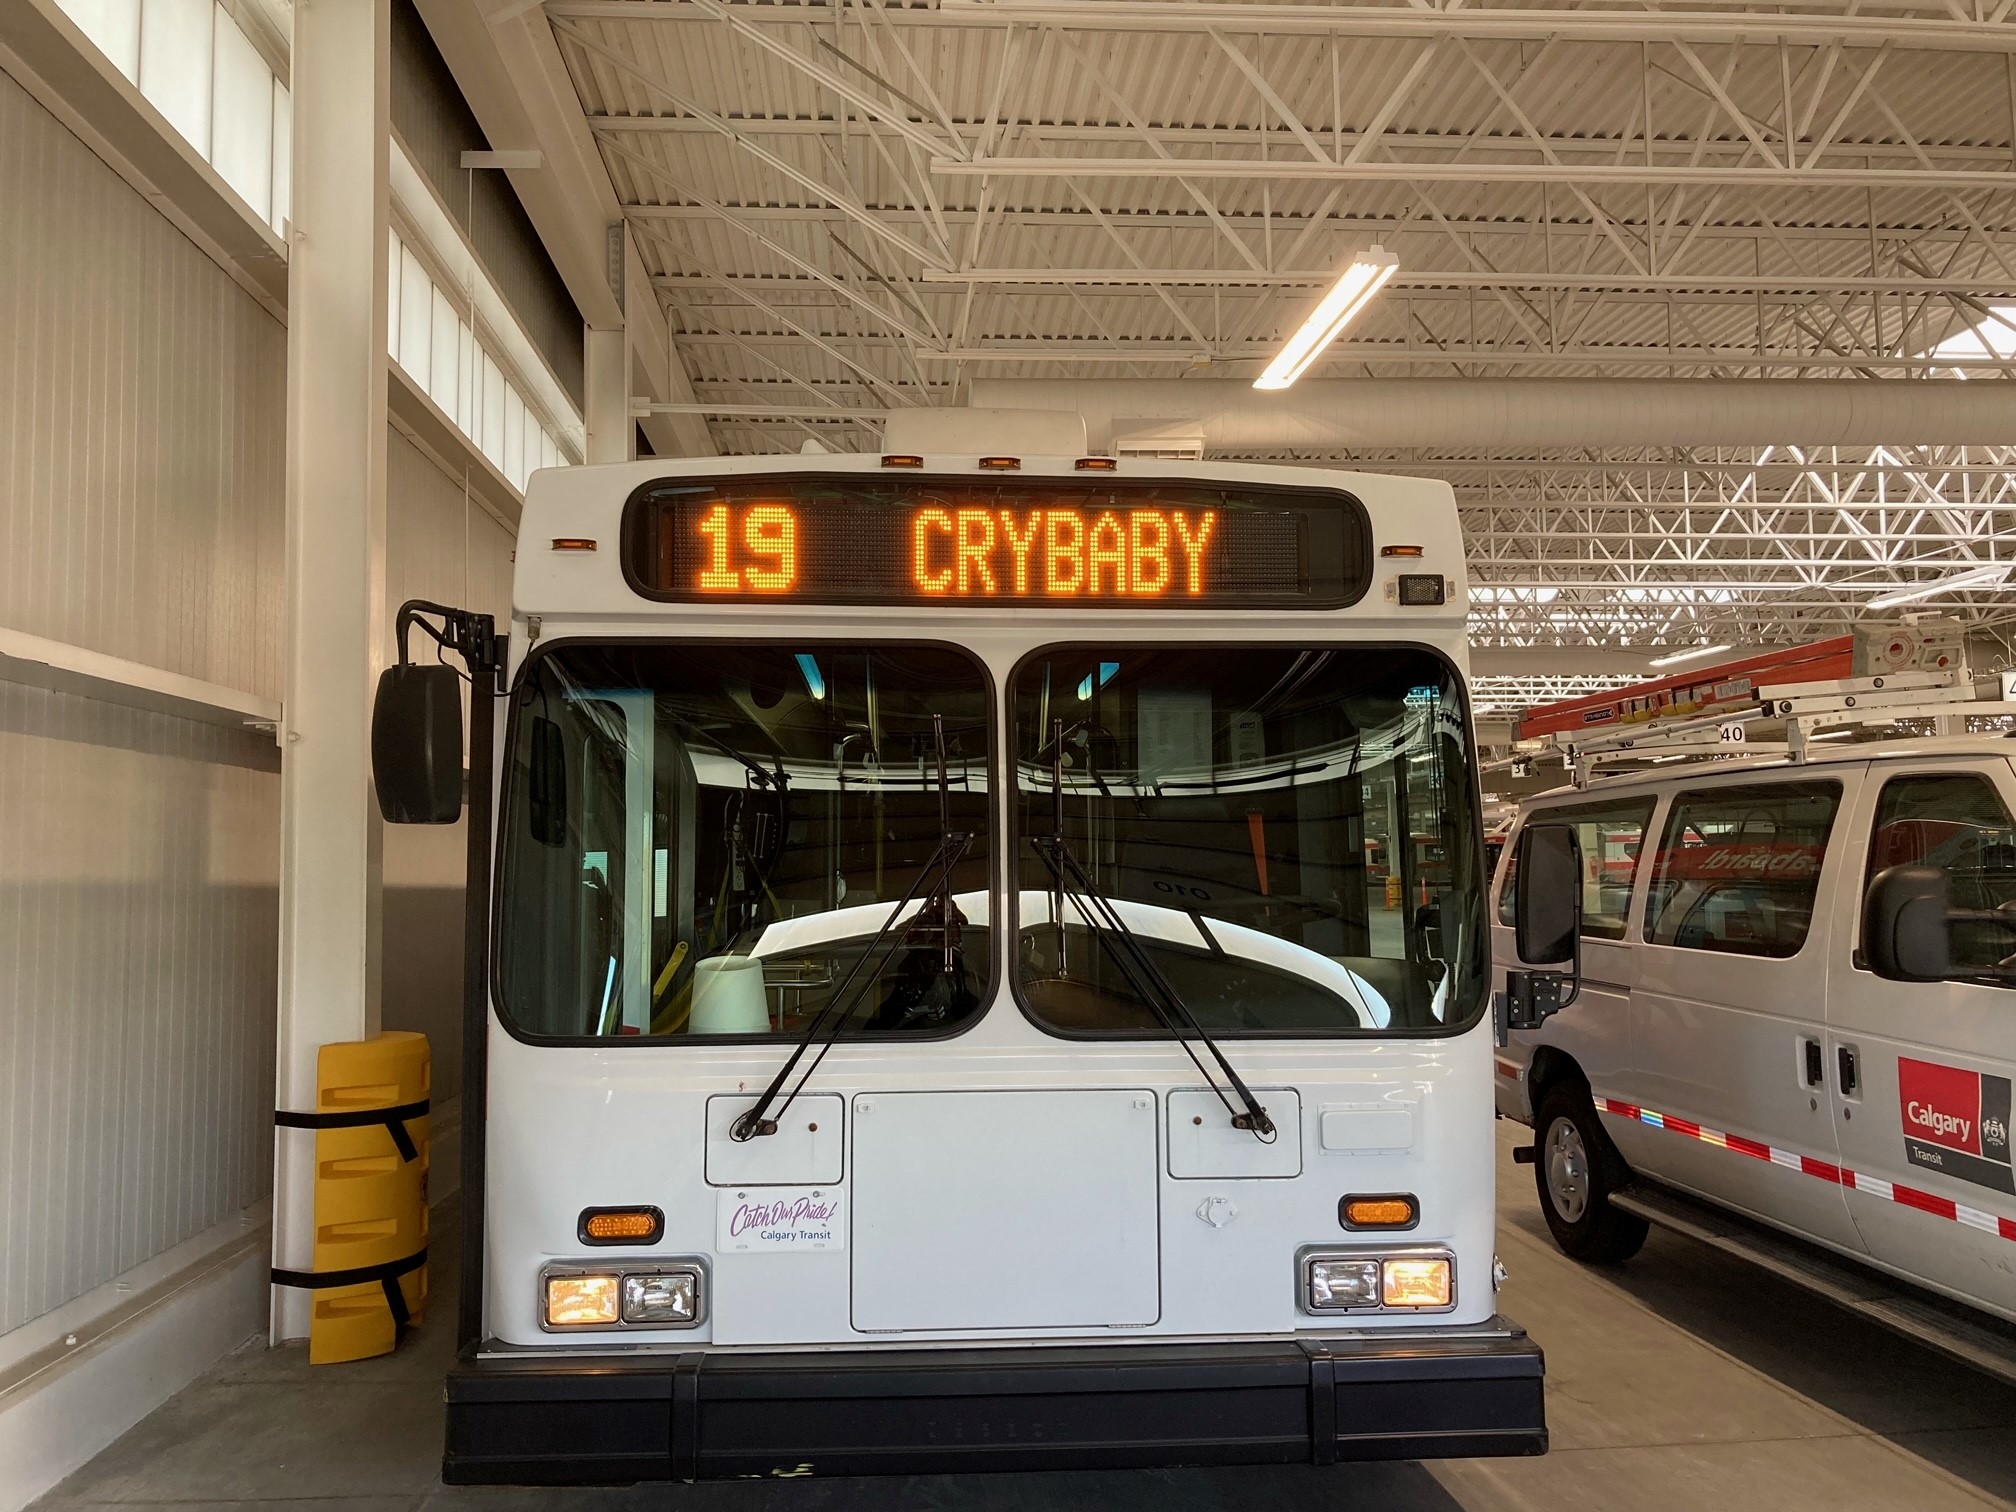 Calgary Transit bus with the name of the route "Crybaby" on the front